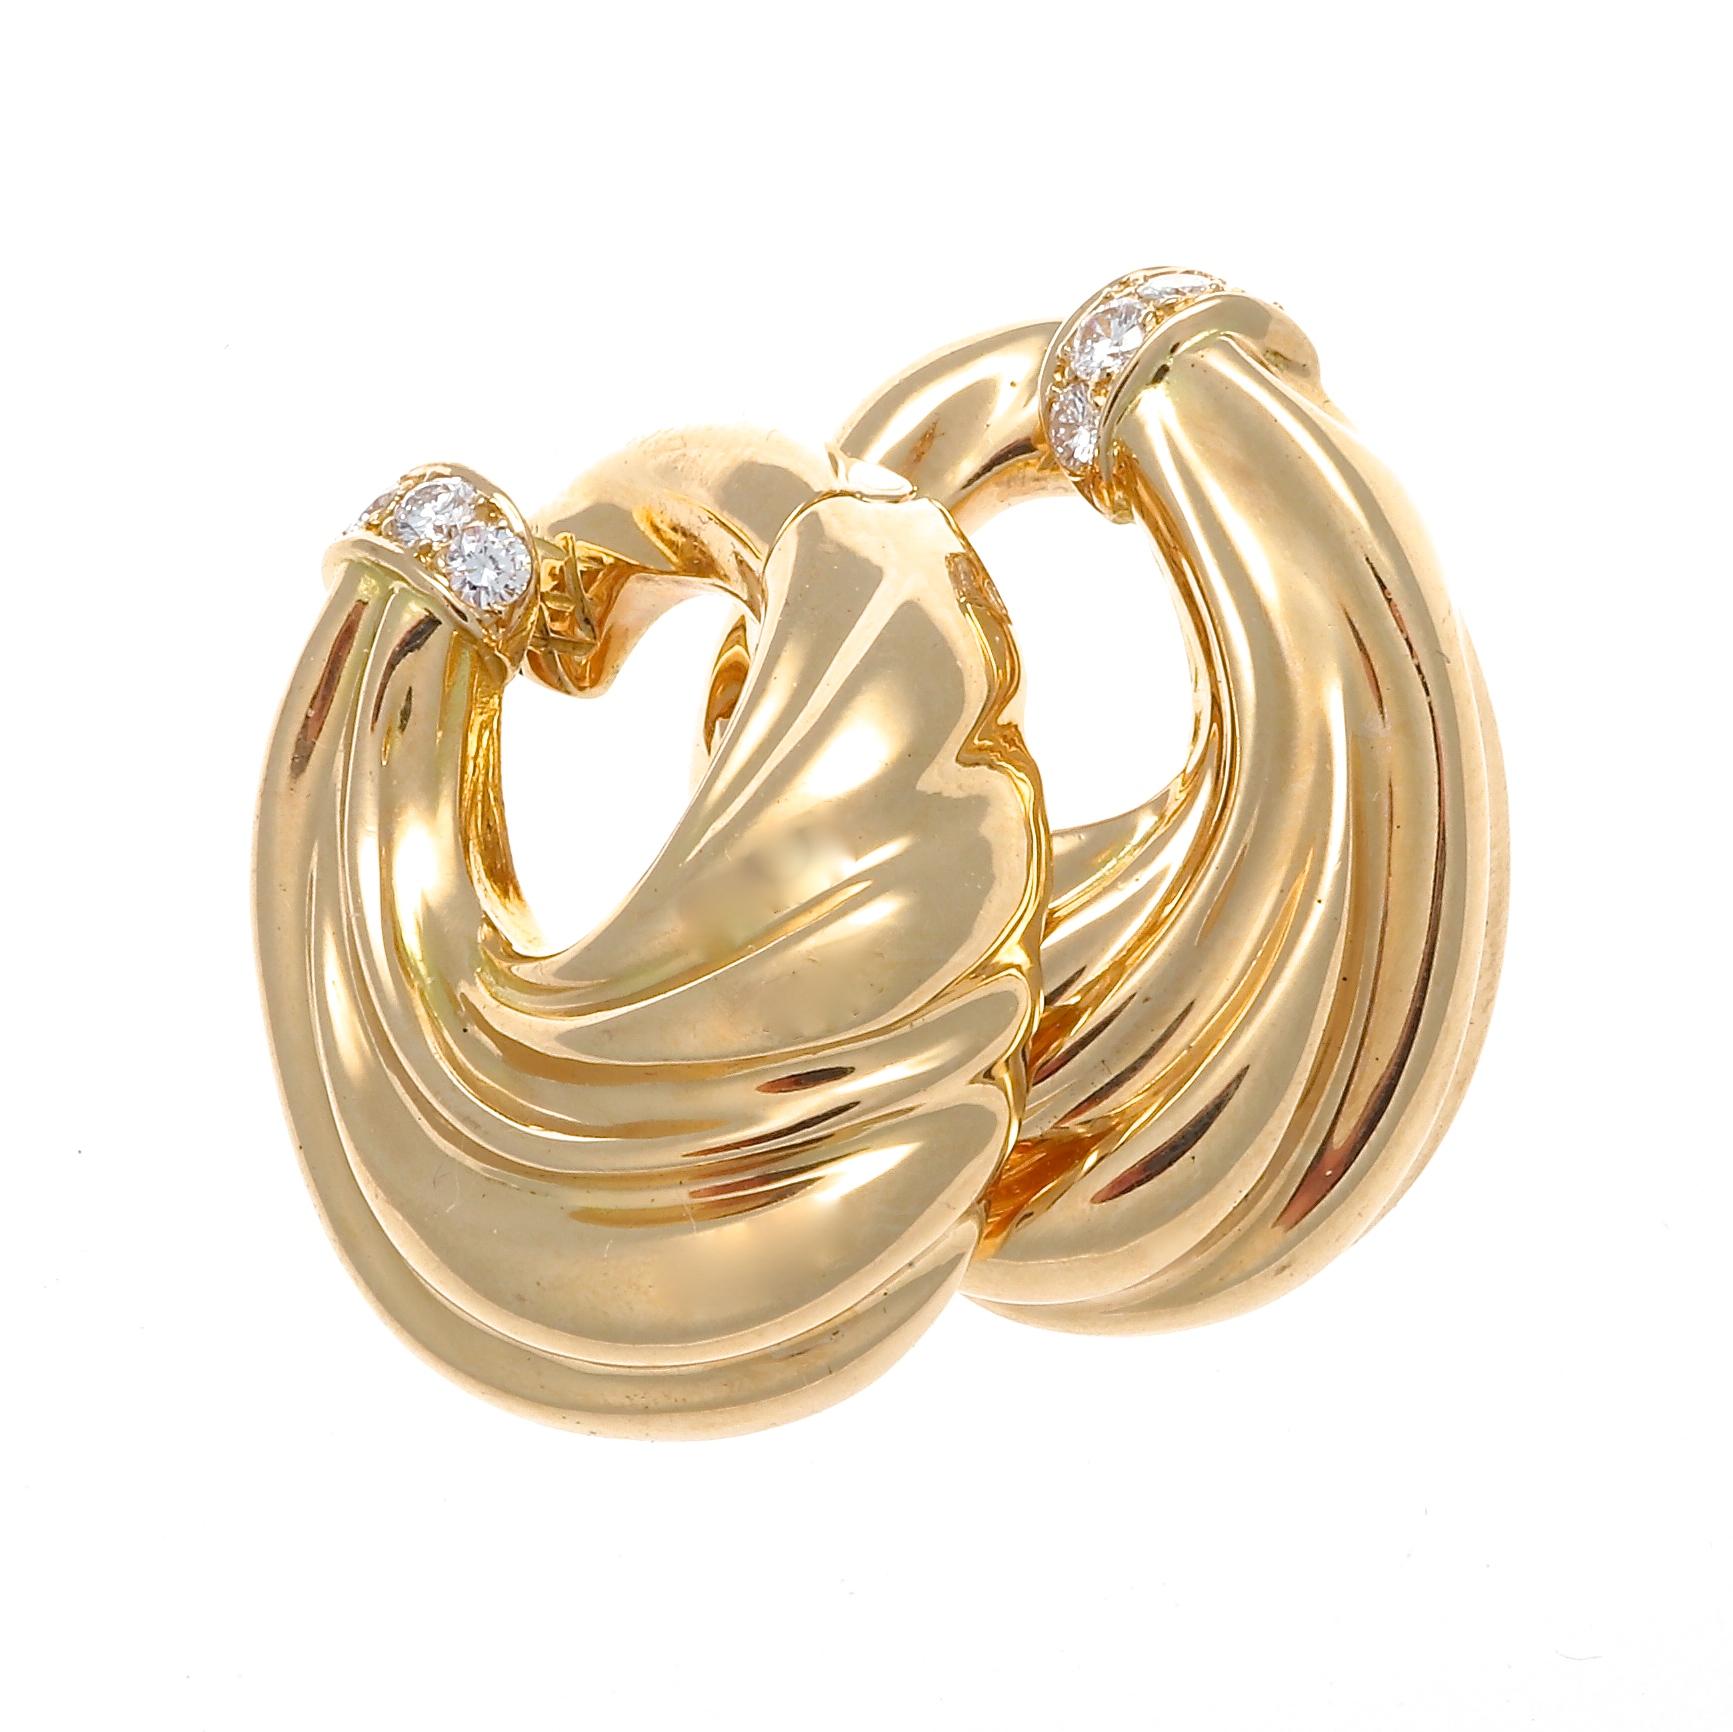 Van Cleef & Arpels jewelry is characterized by a distinctive blend of poetry and refinement that is an invitation to a timeless universe of beauty and harmony. Designed in fluted 18k gold twisting around the ear to feature a single row of colorless